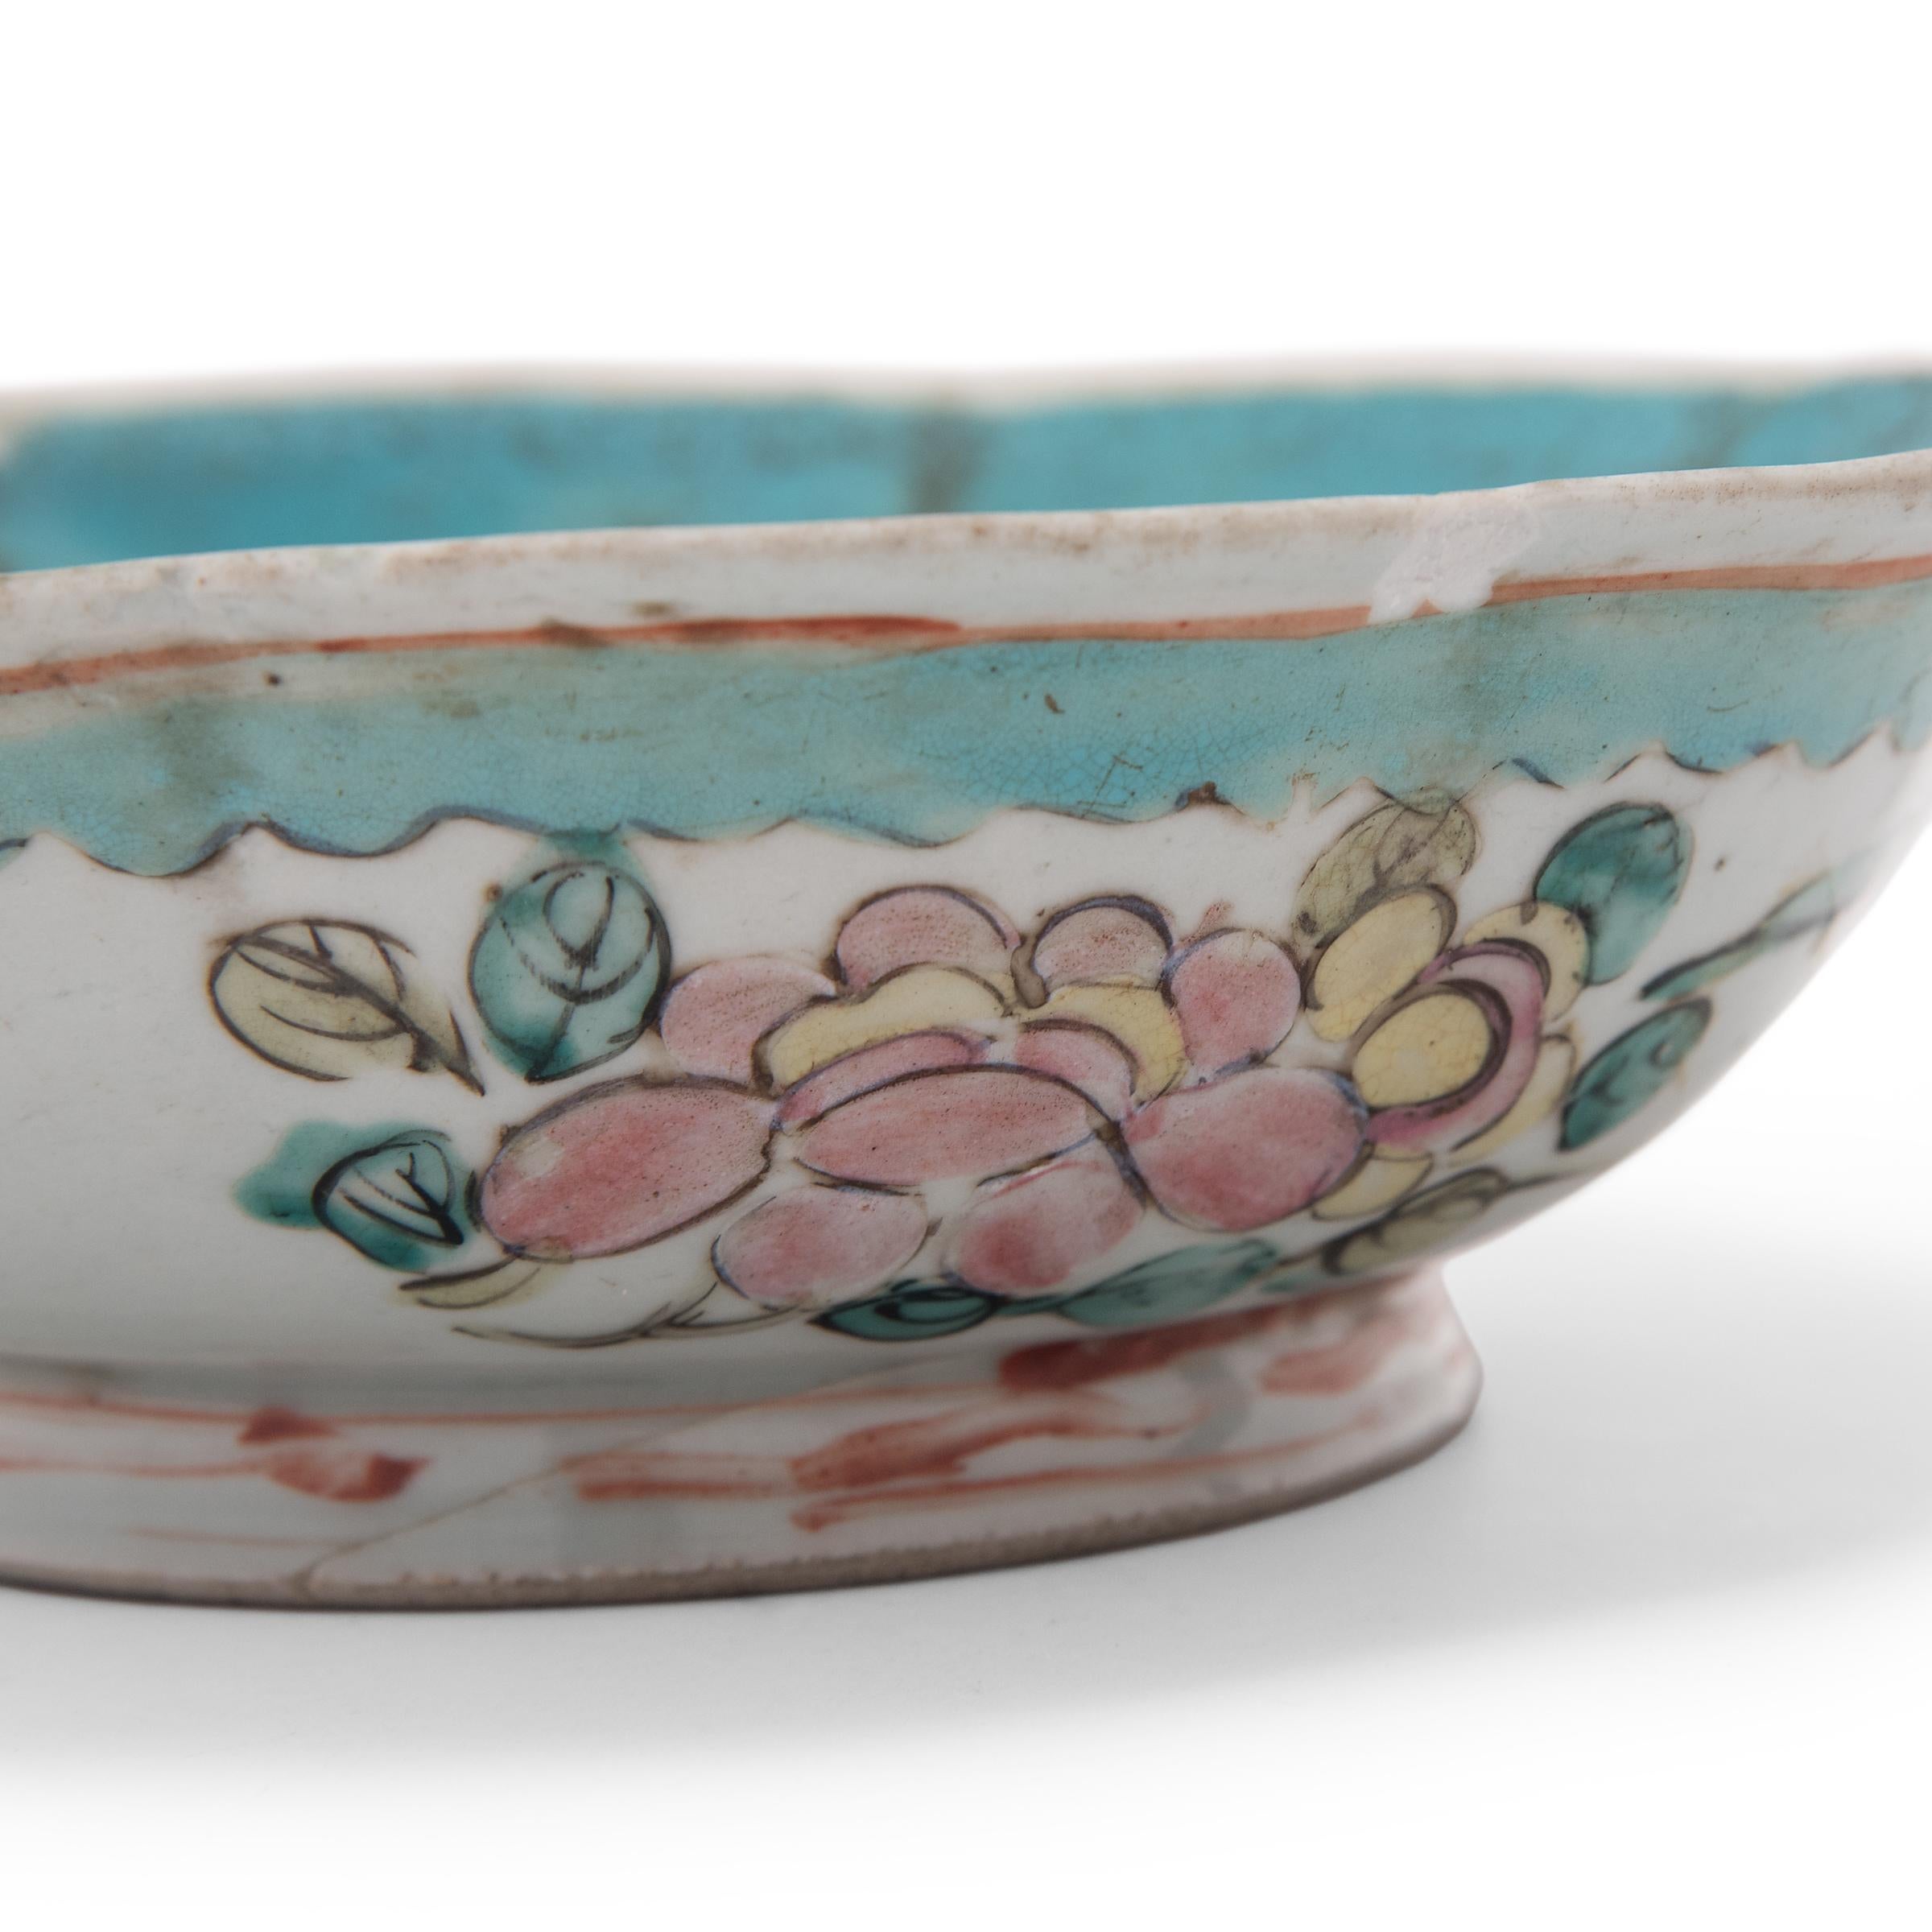 19th Century Chinese Floral Offering Bowl, c. 1850